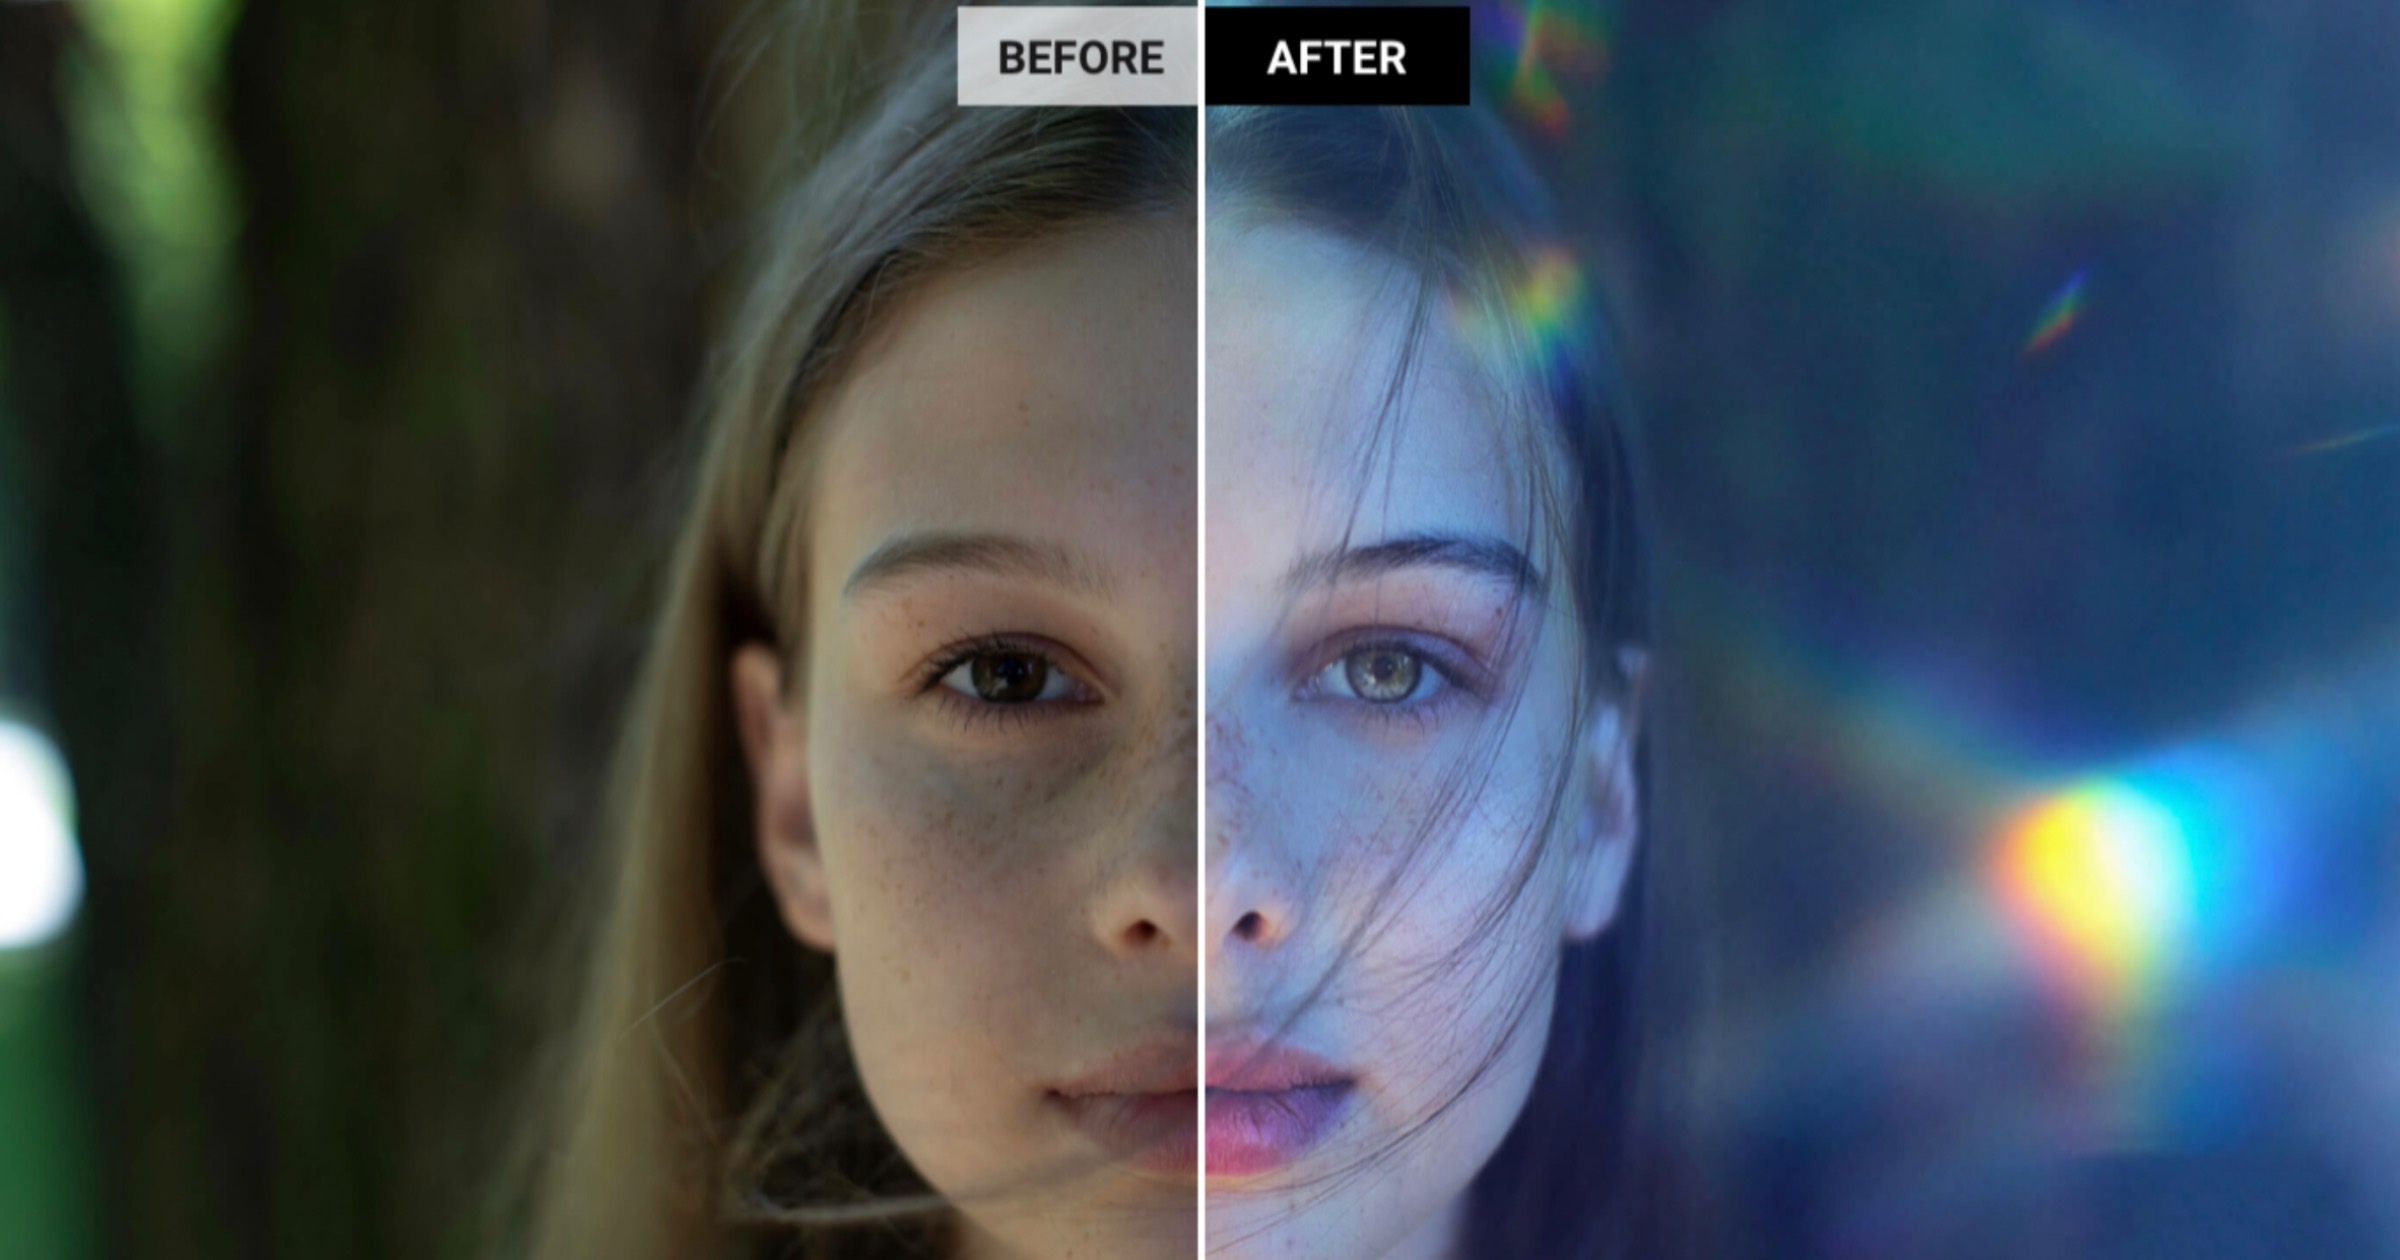 Before and after comparison of a photo edited with Luminar AI.